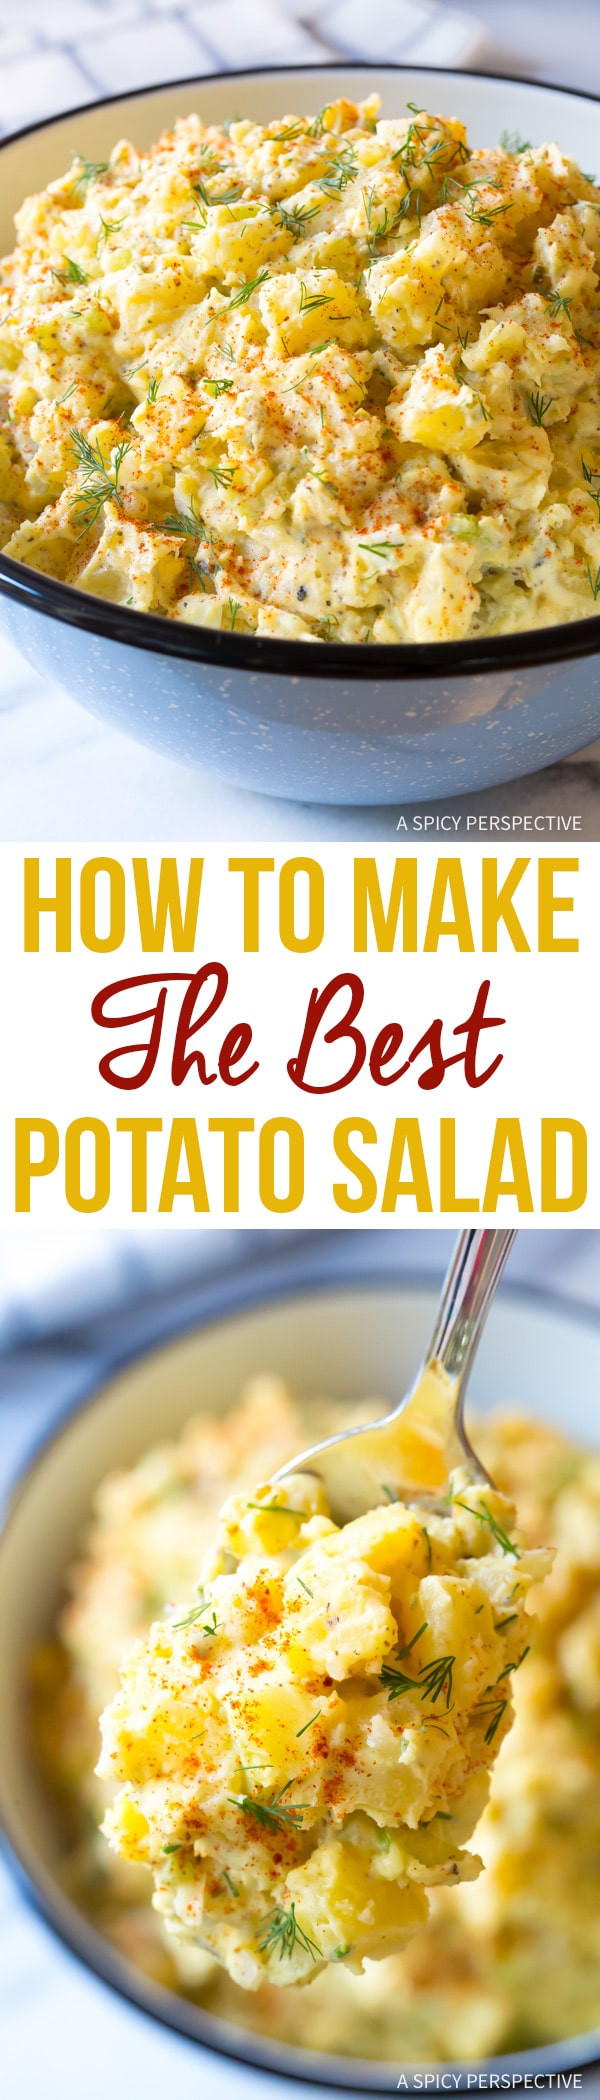 Making Potato Salad
 How To Make The Best Potato Salad Recipe A Spicy Perspective